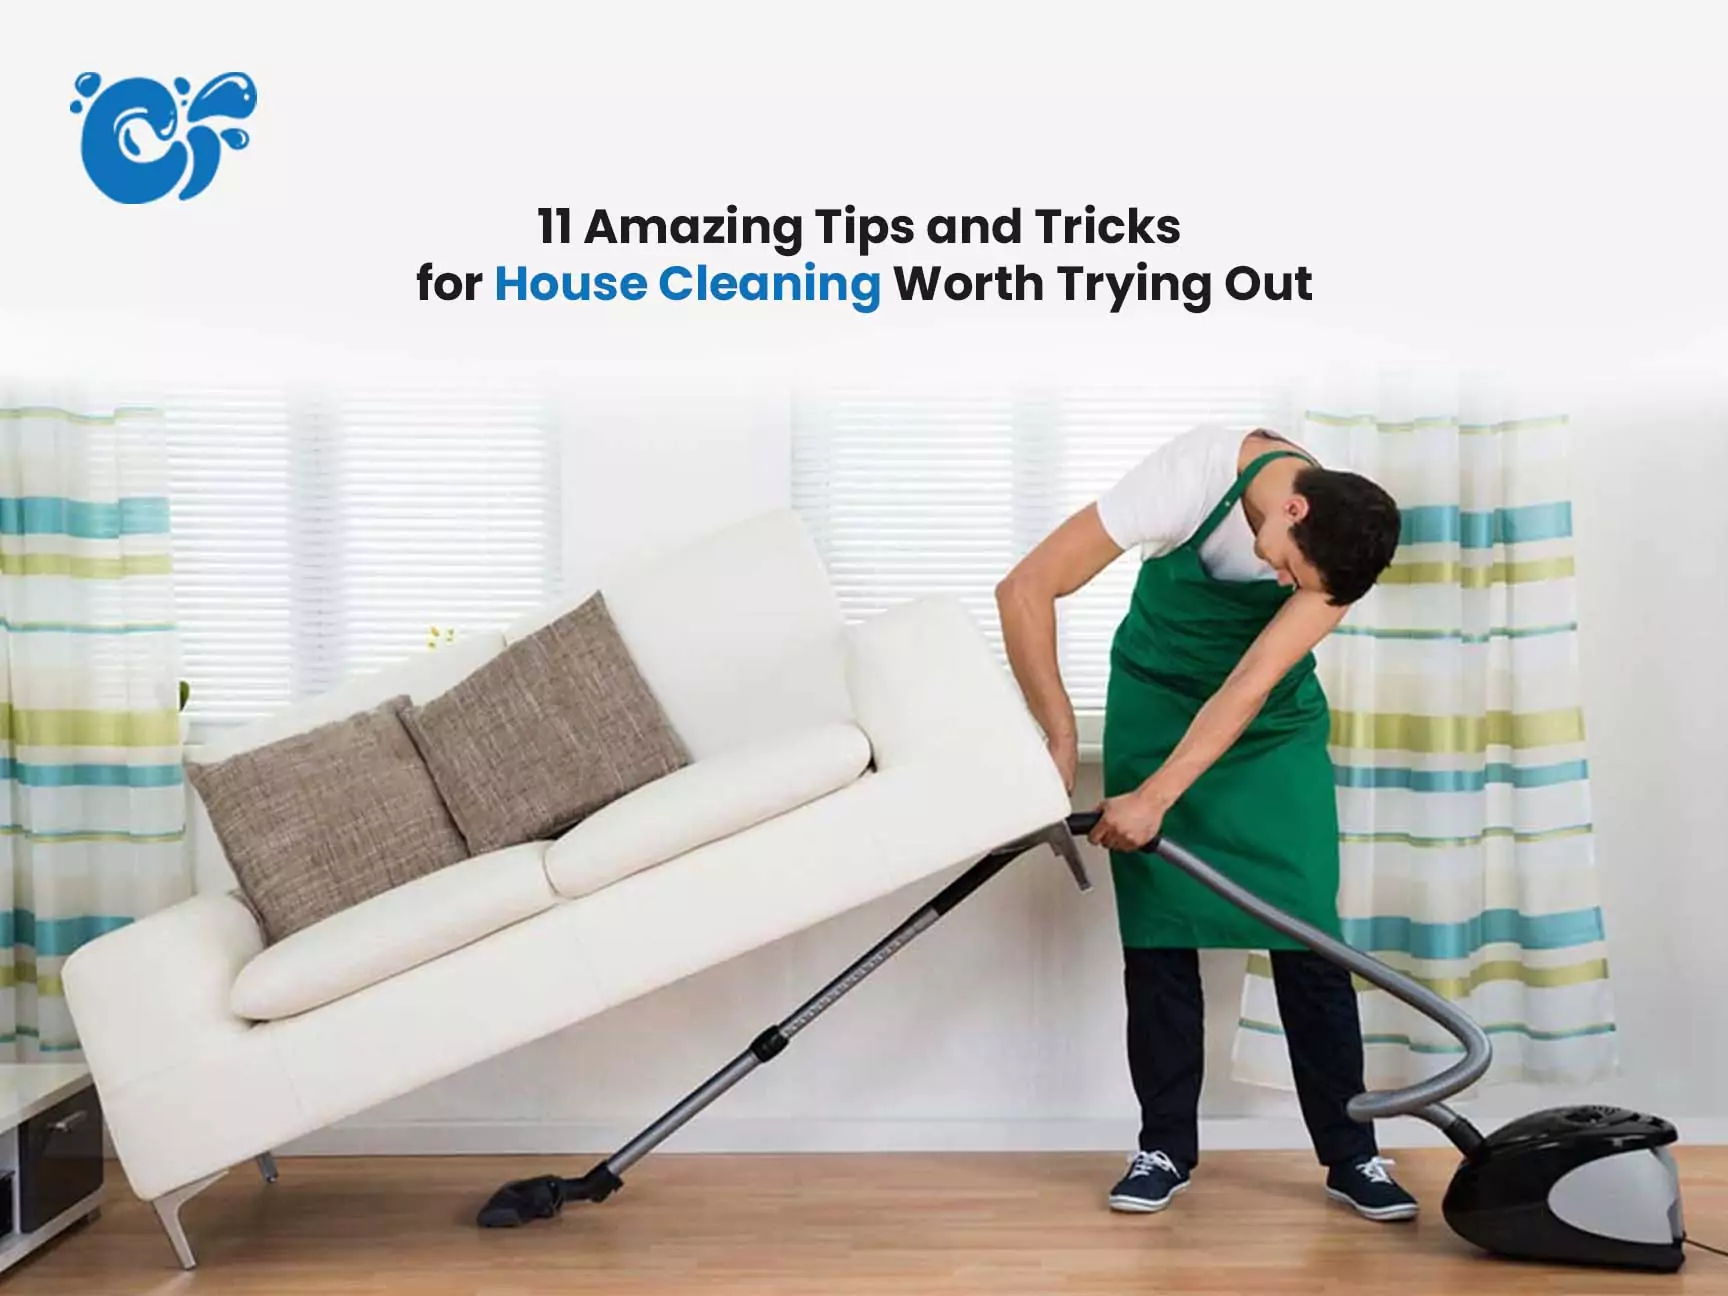 11 Amazing Tips and Tricks for House Cleaning Worth Trying Out: